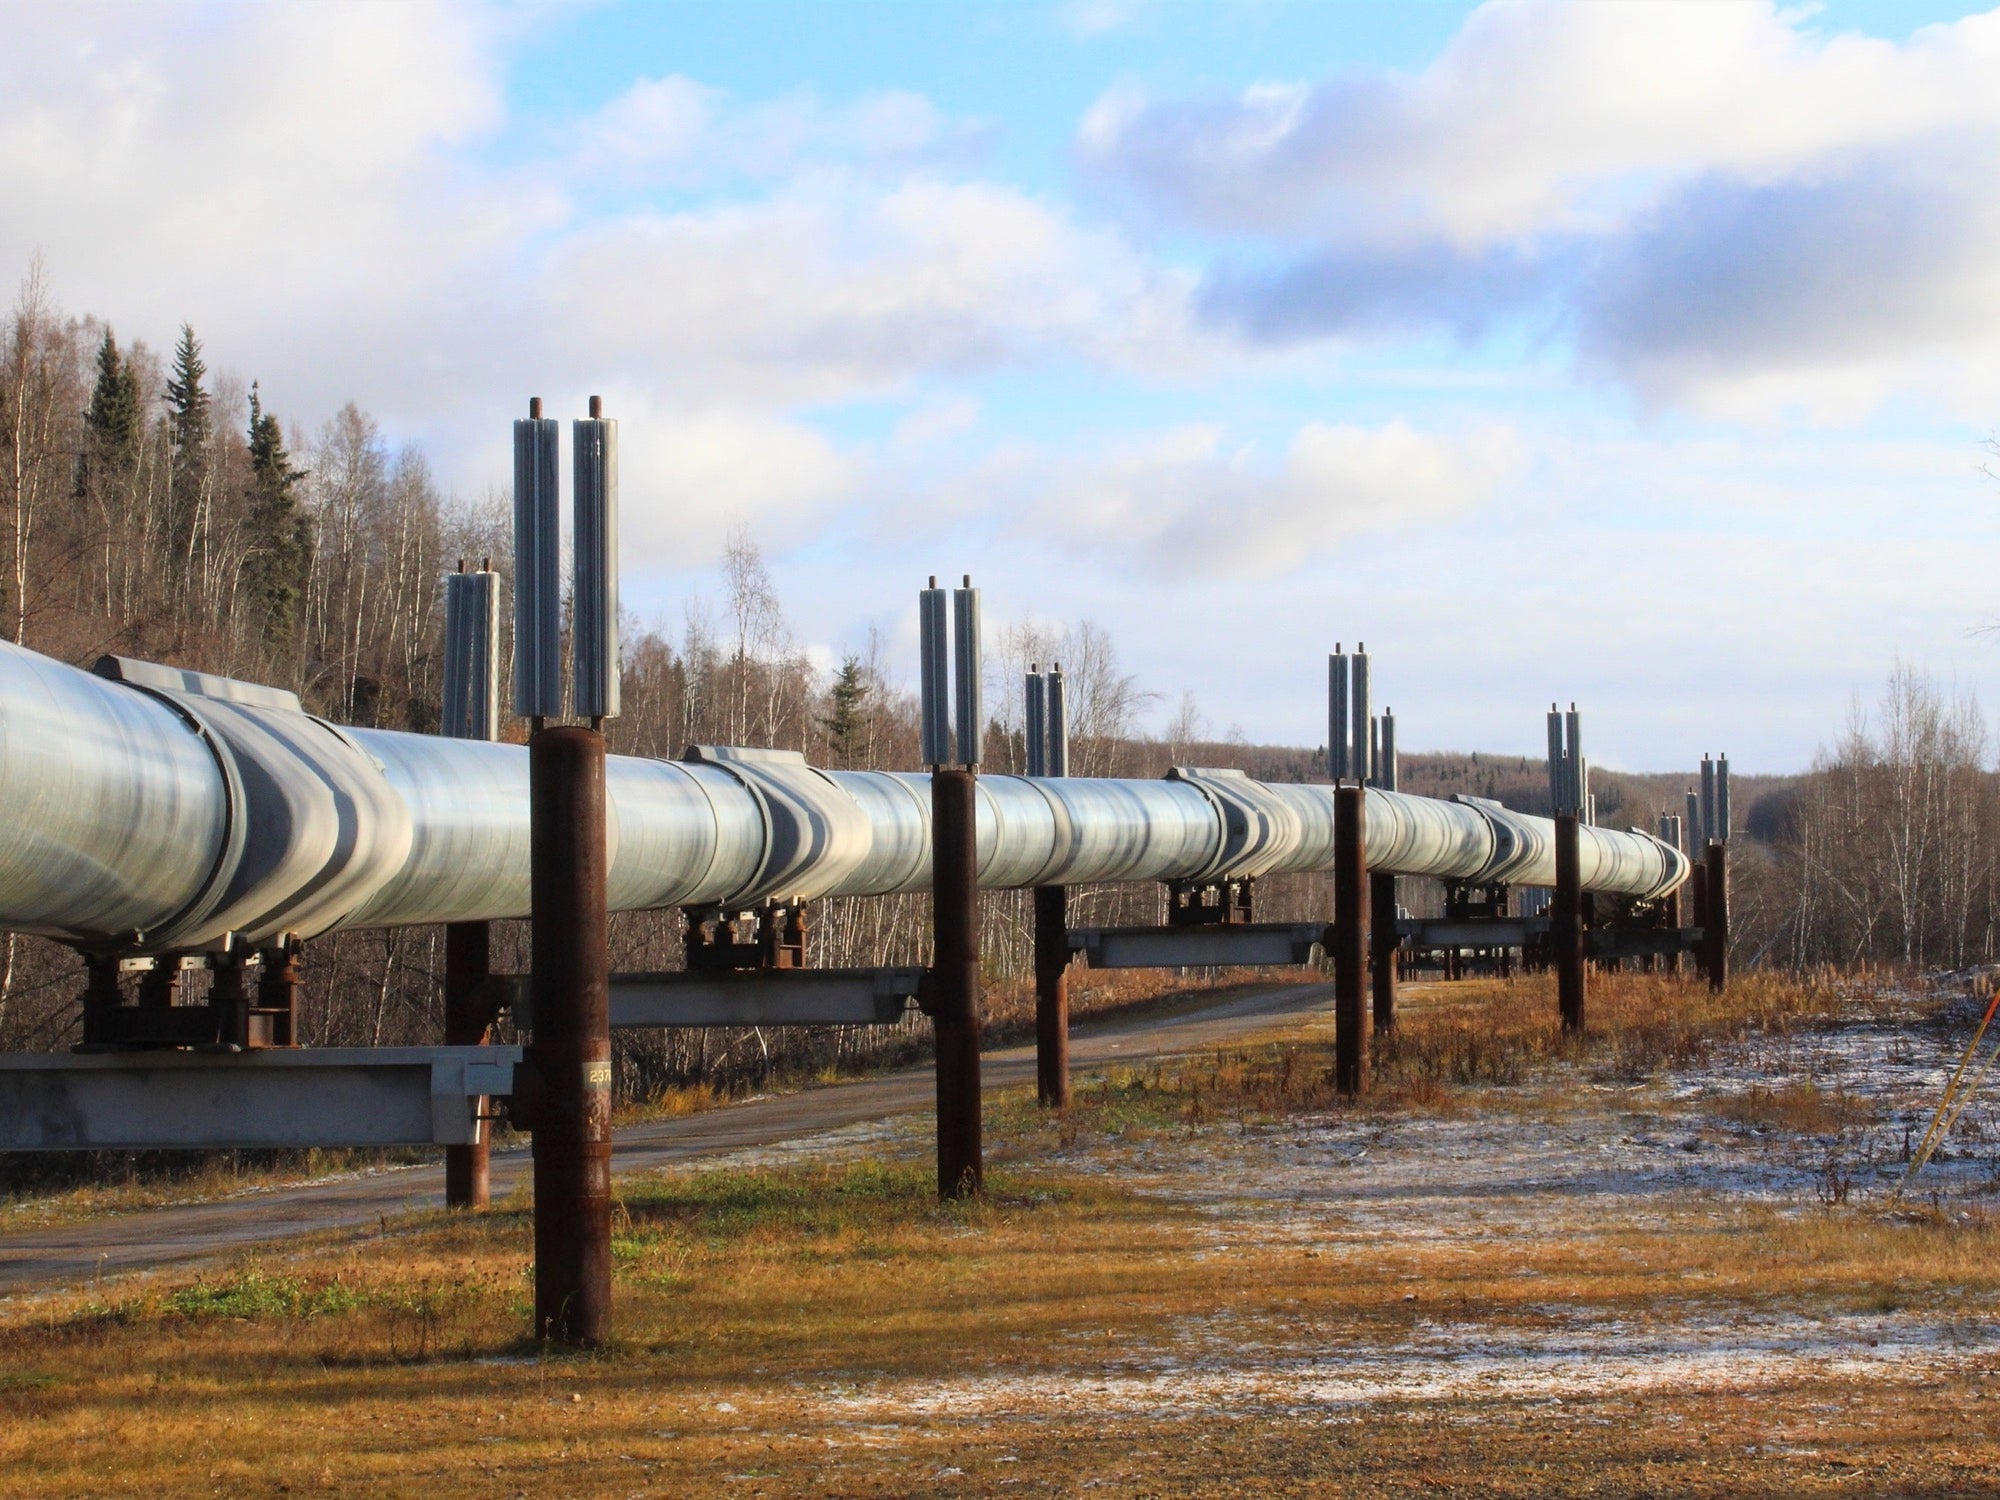 Keystone XL was supposed to be a green pipeline. What does that even mean?